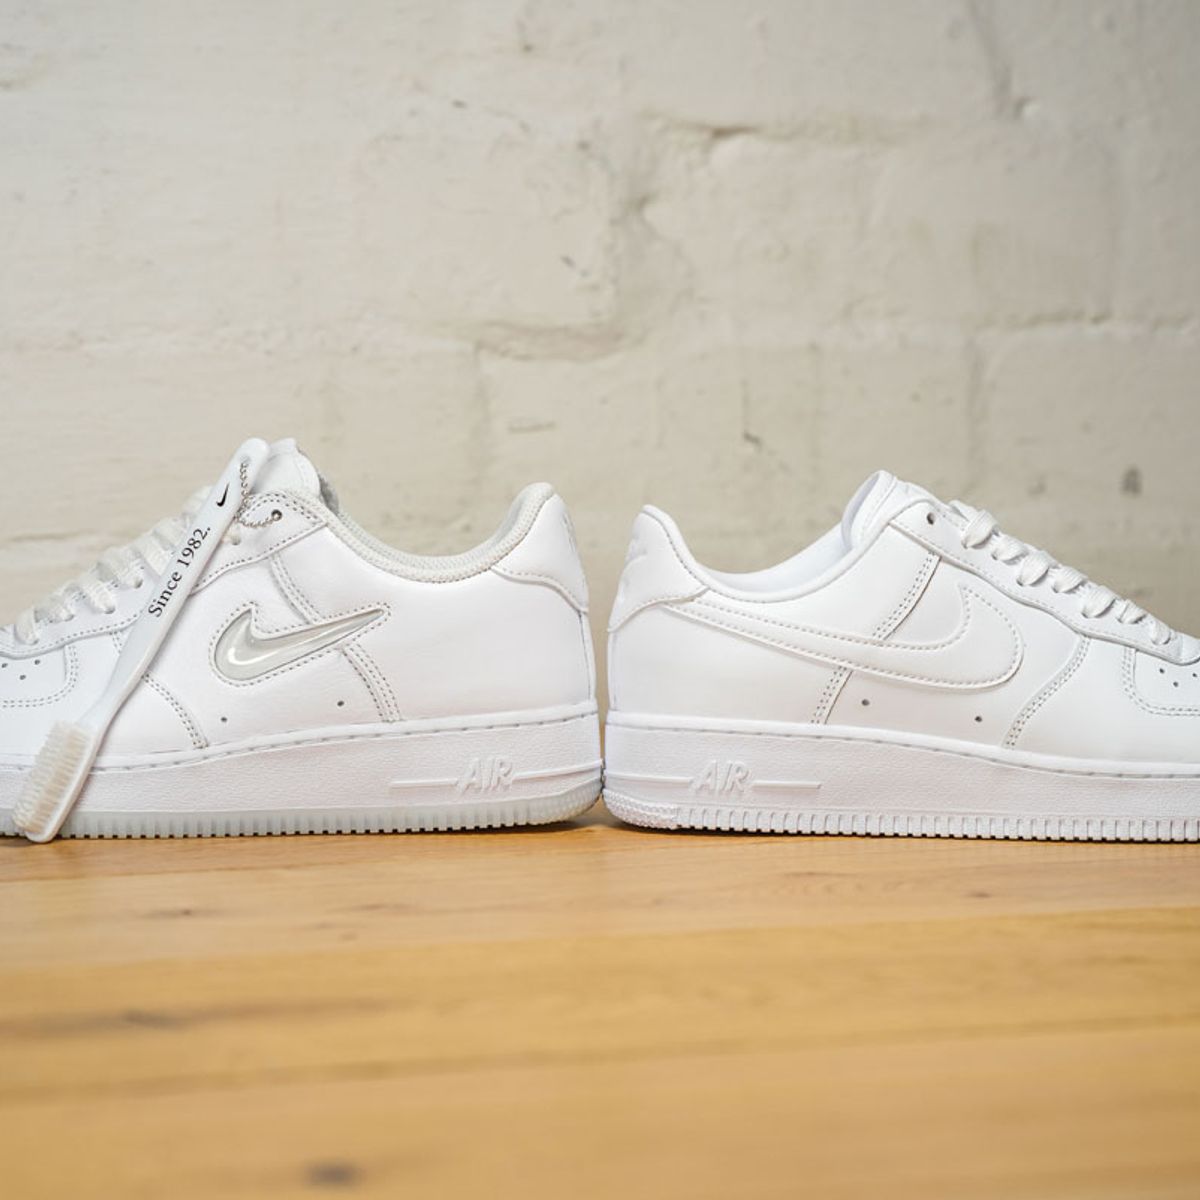 Air Force 1: On or off court, a true staple for sneakerheads